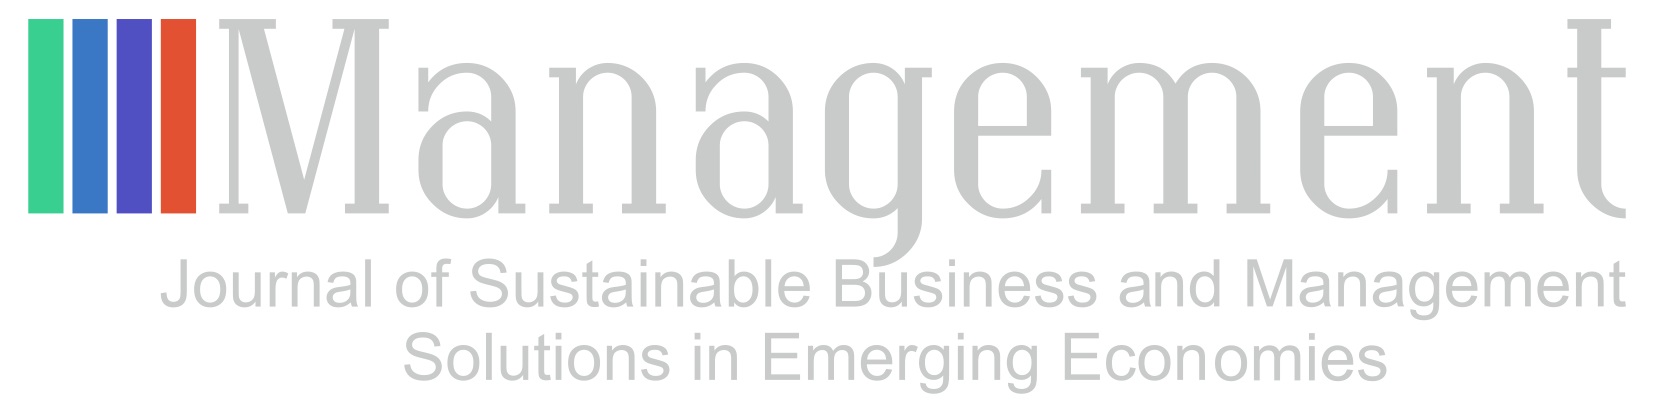 Management: Journal of Sustainable Business and Management Solutions in Emerging Economies Cover Image